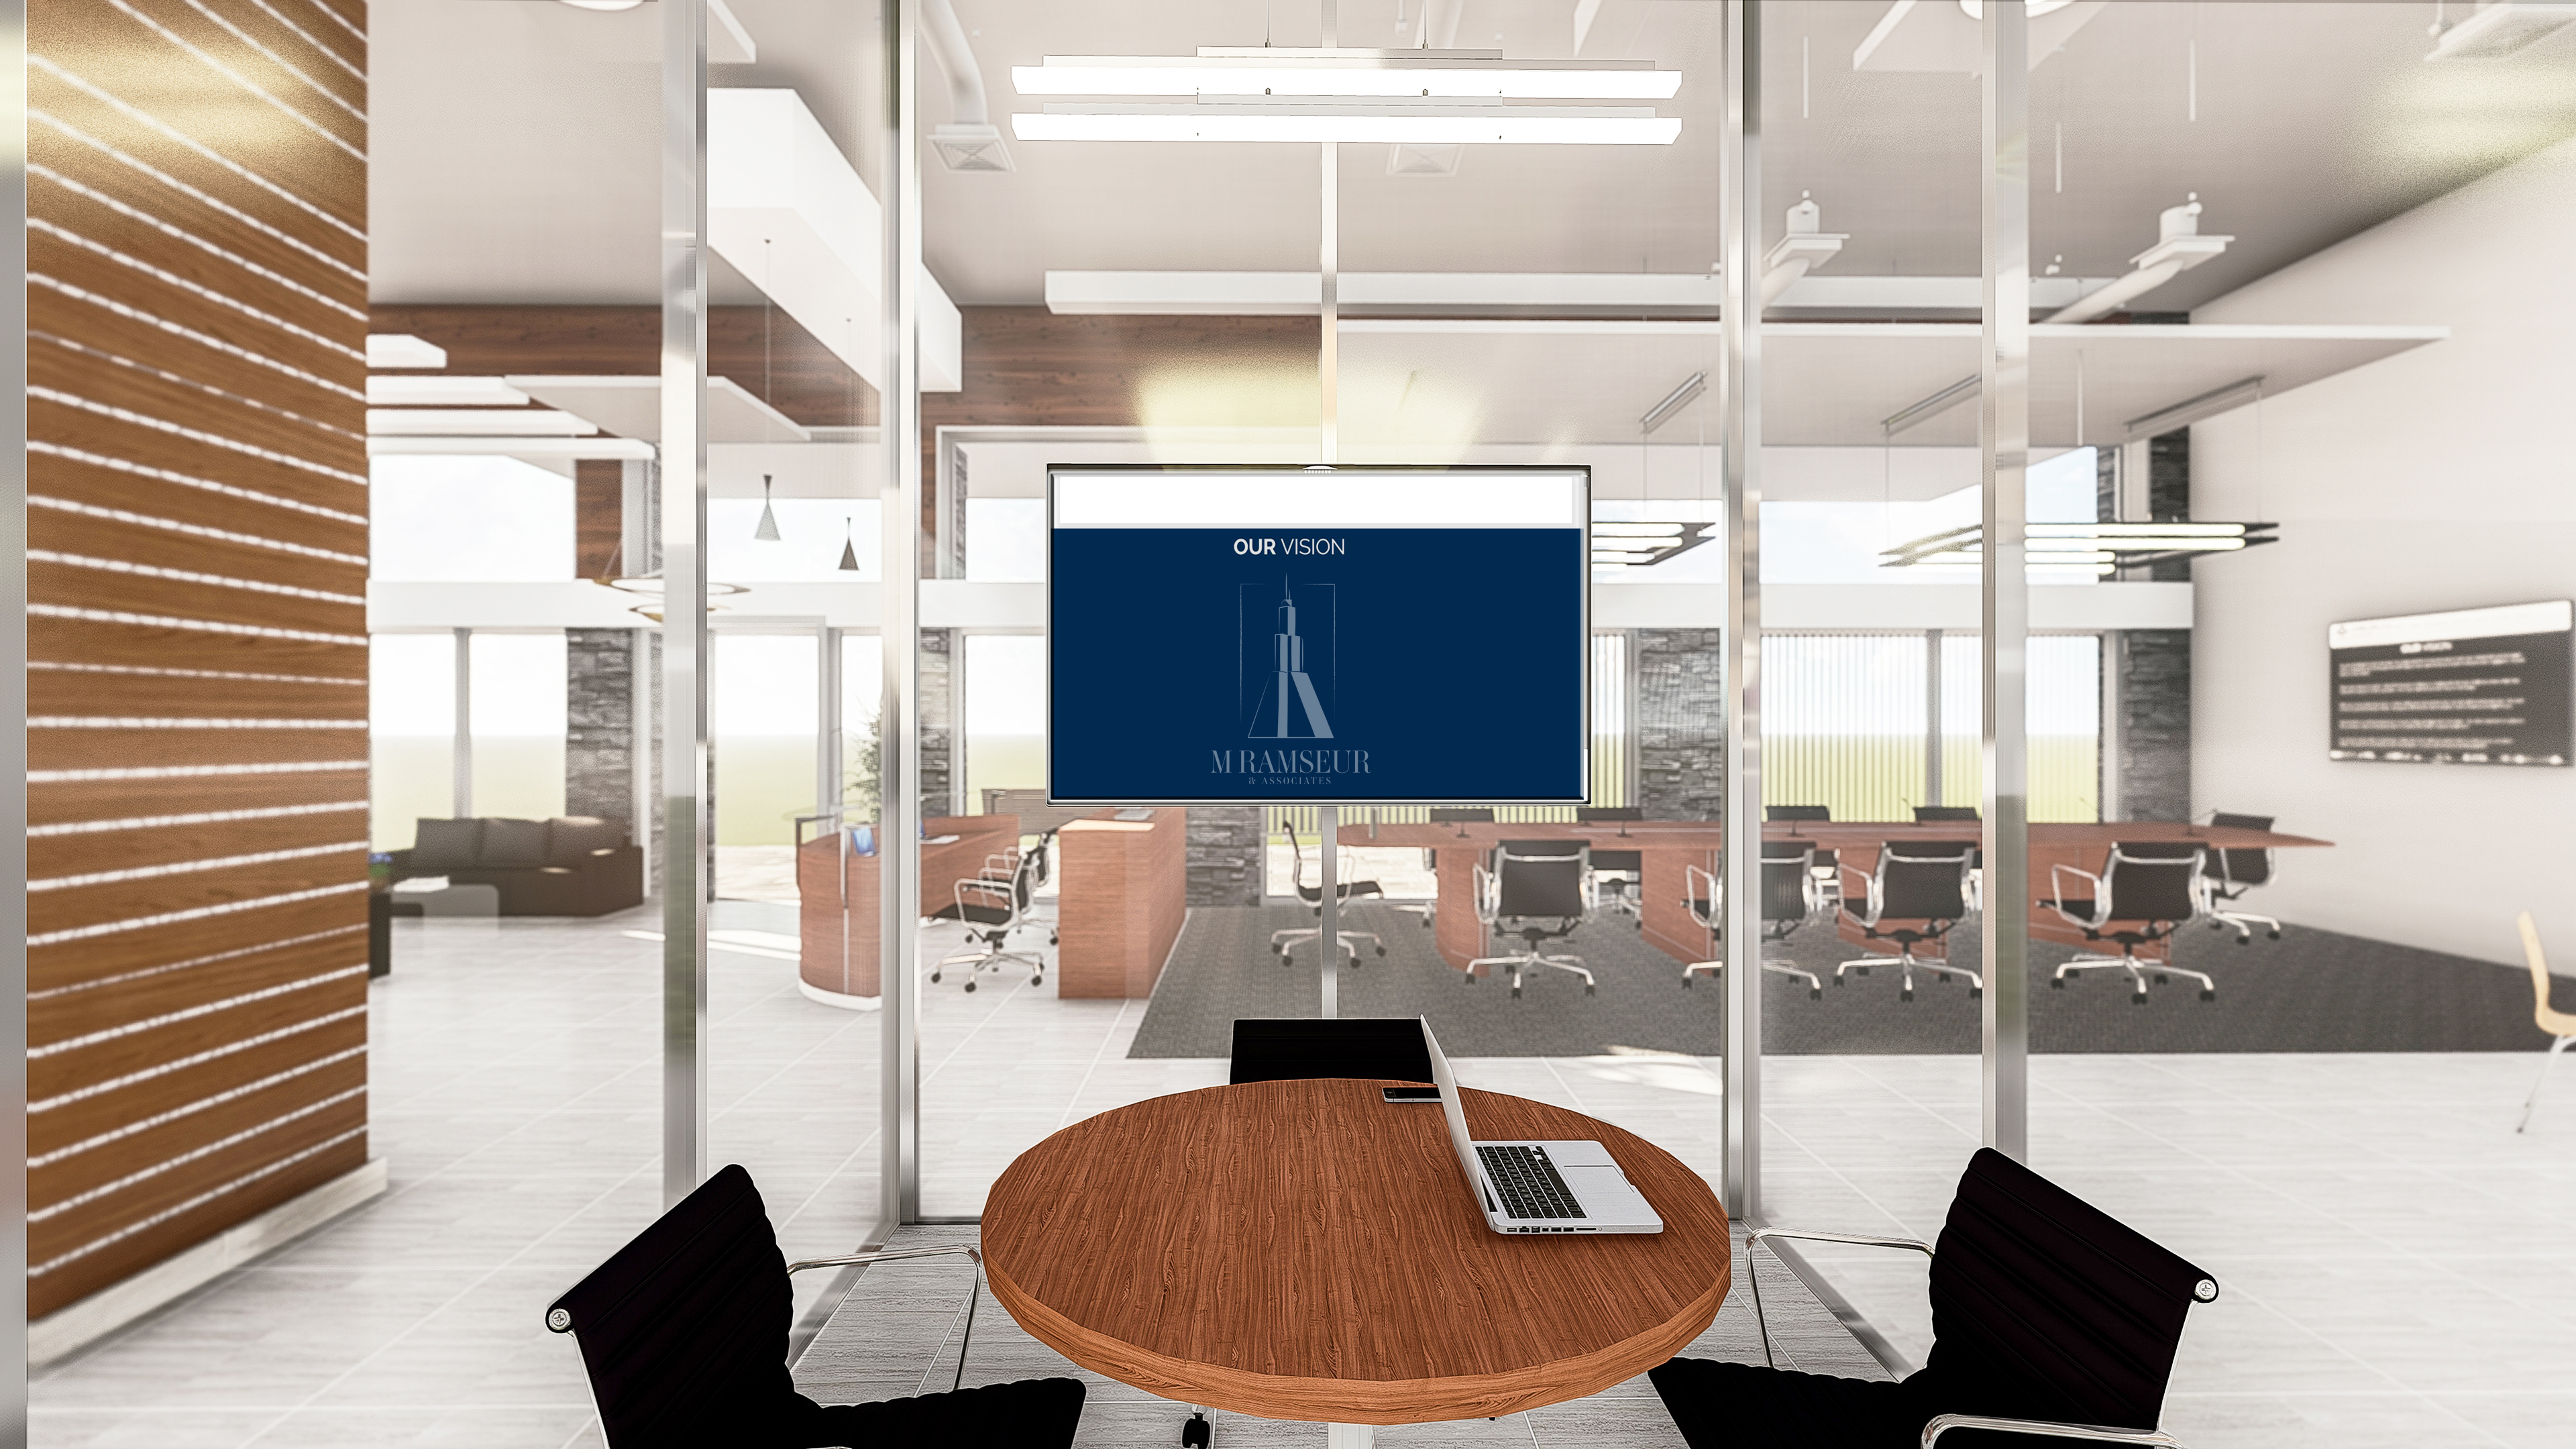 SCHEMATIC DESIGN LAW OFFICE CONCEPT HUDDLE ROOM RENDERING